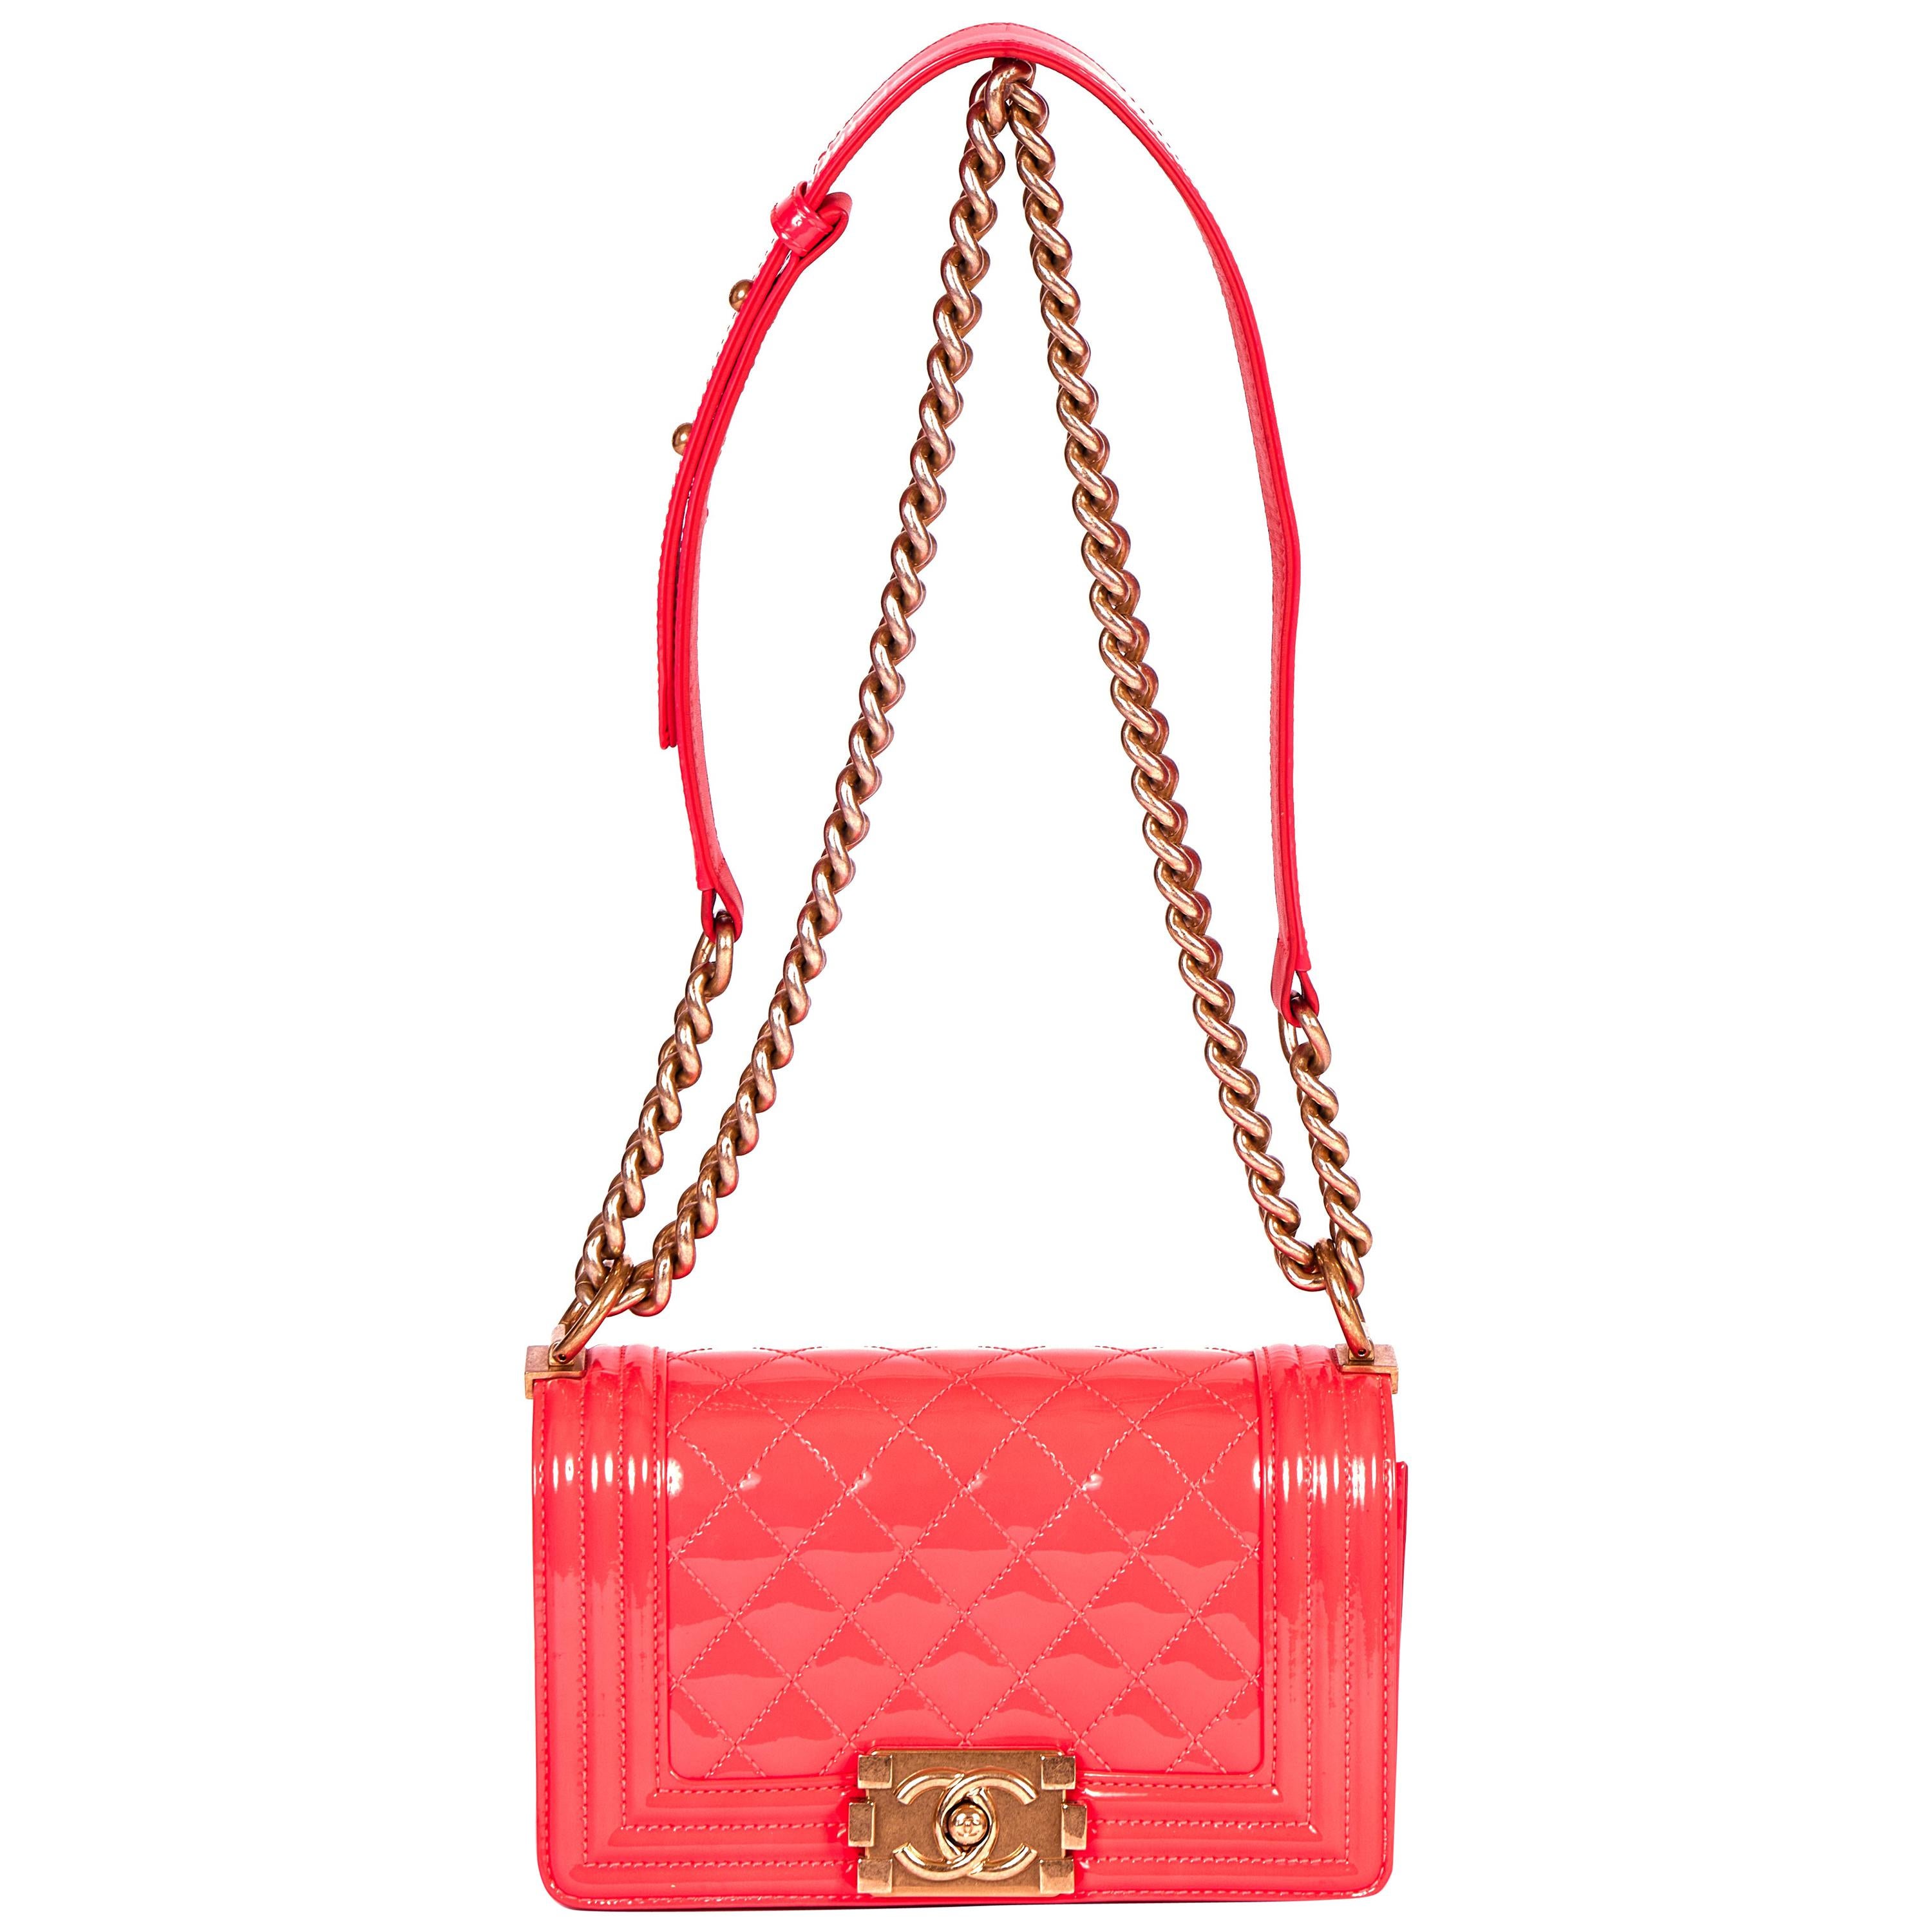 New Chanel Fluorescent Patent Pink Boy Bag